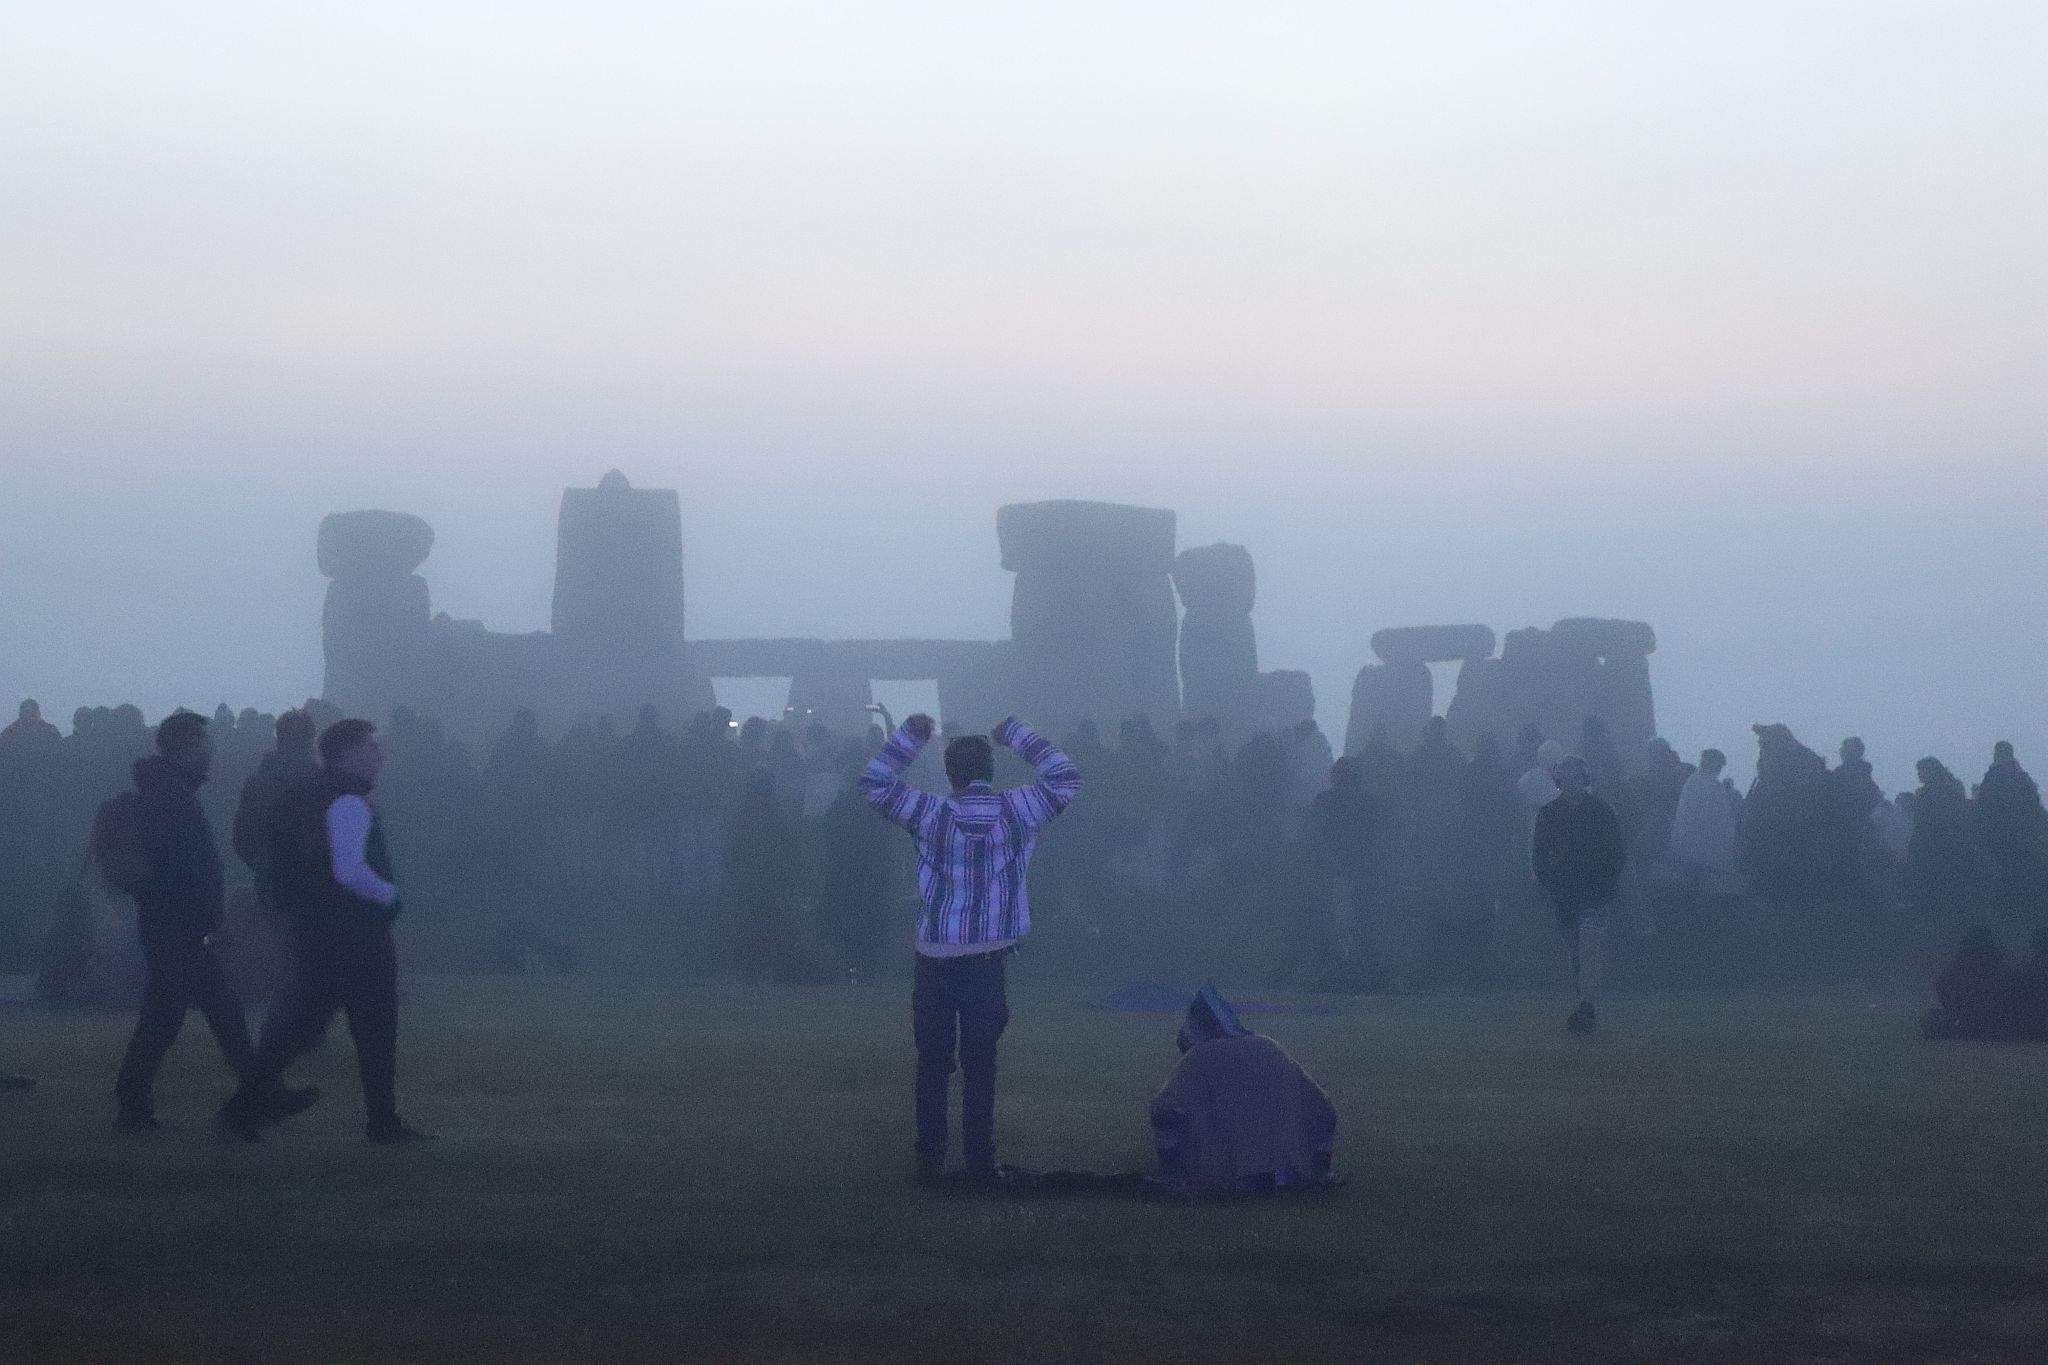 First light at dawn. The 2023 Summer Solstice longest day at Stonehenge in Wiltshire, UK. Photo taken 21-Jun-2023.